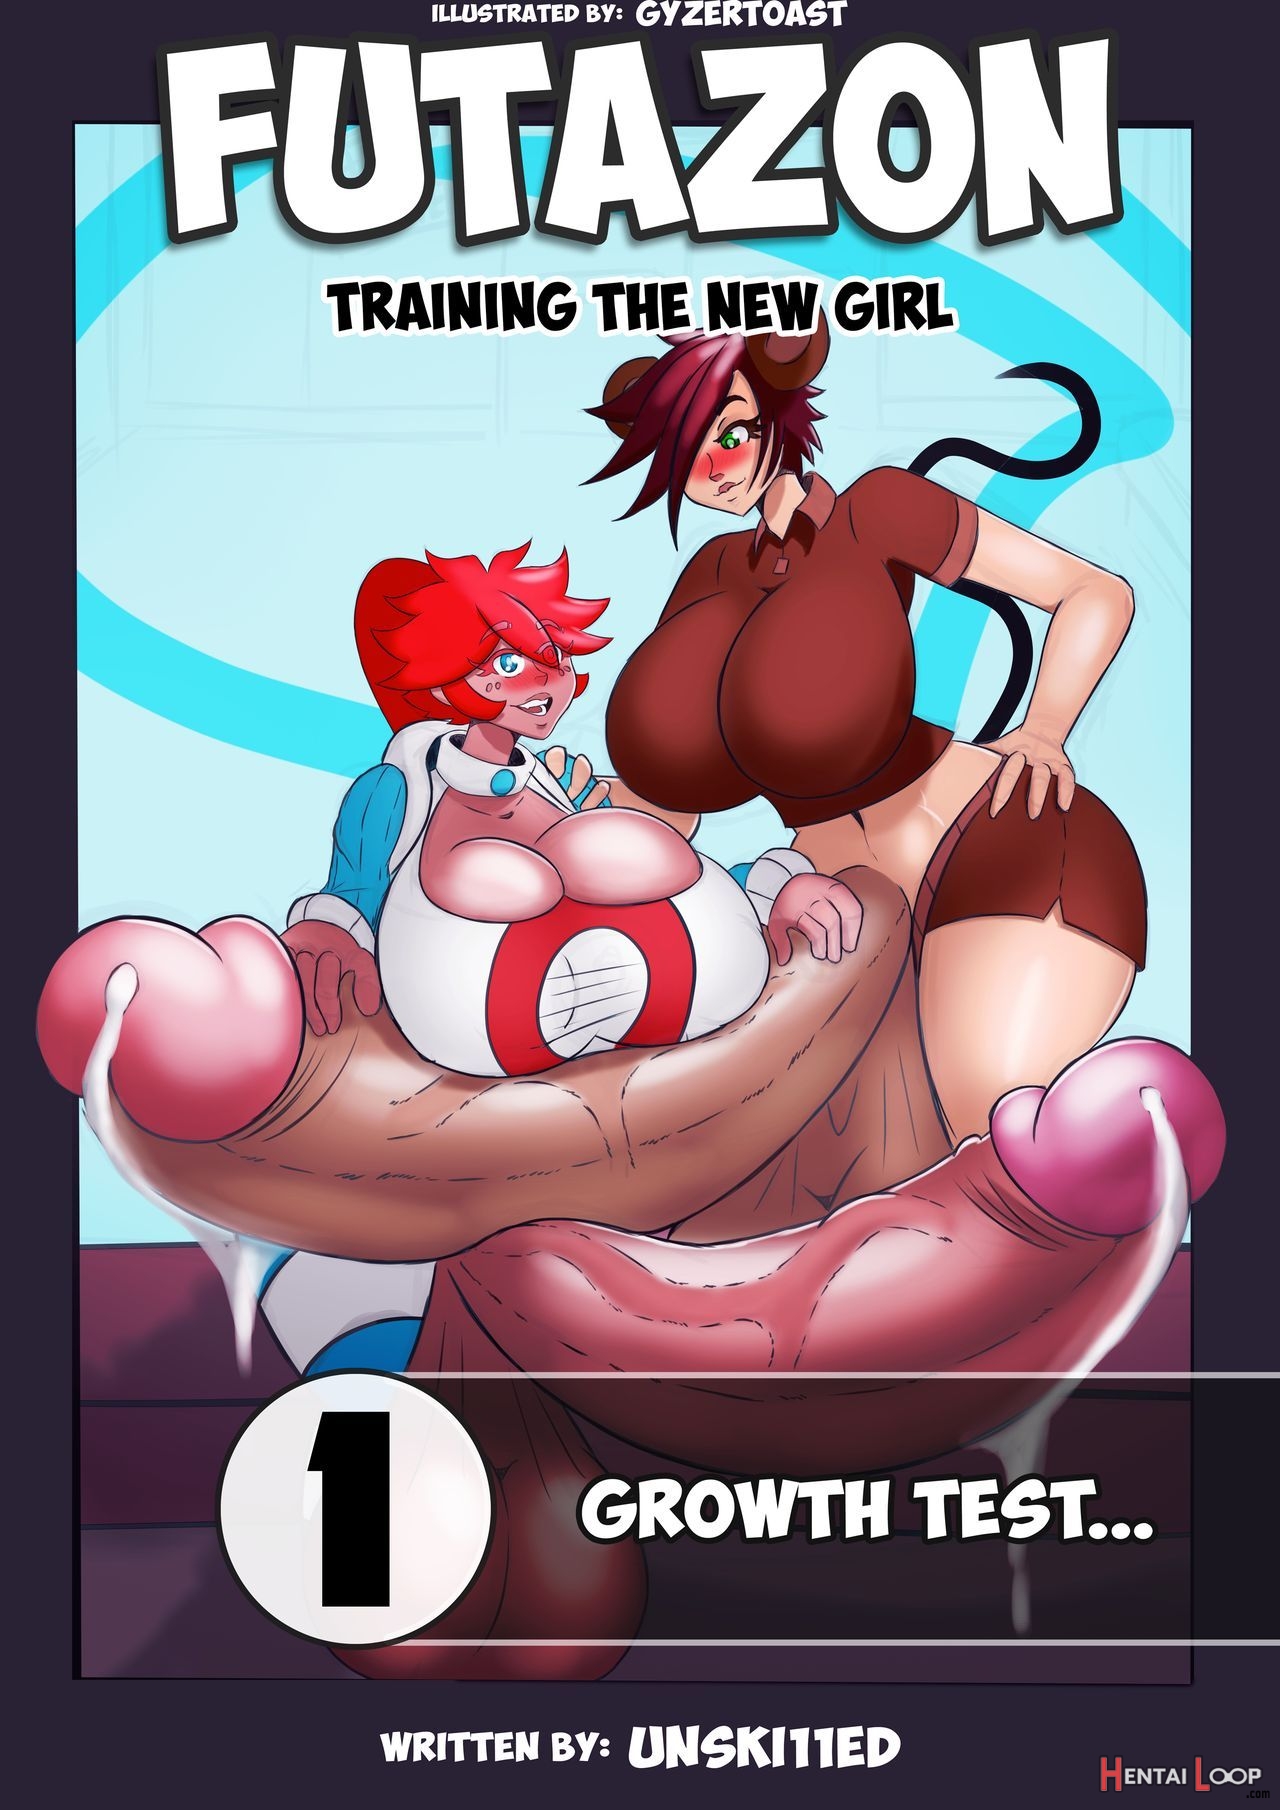 Futazon: Training The New Girl | Ch.1 Growth Test| page 1